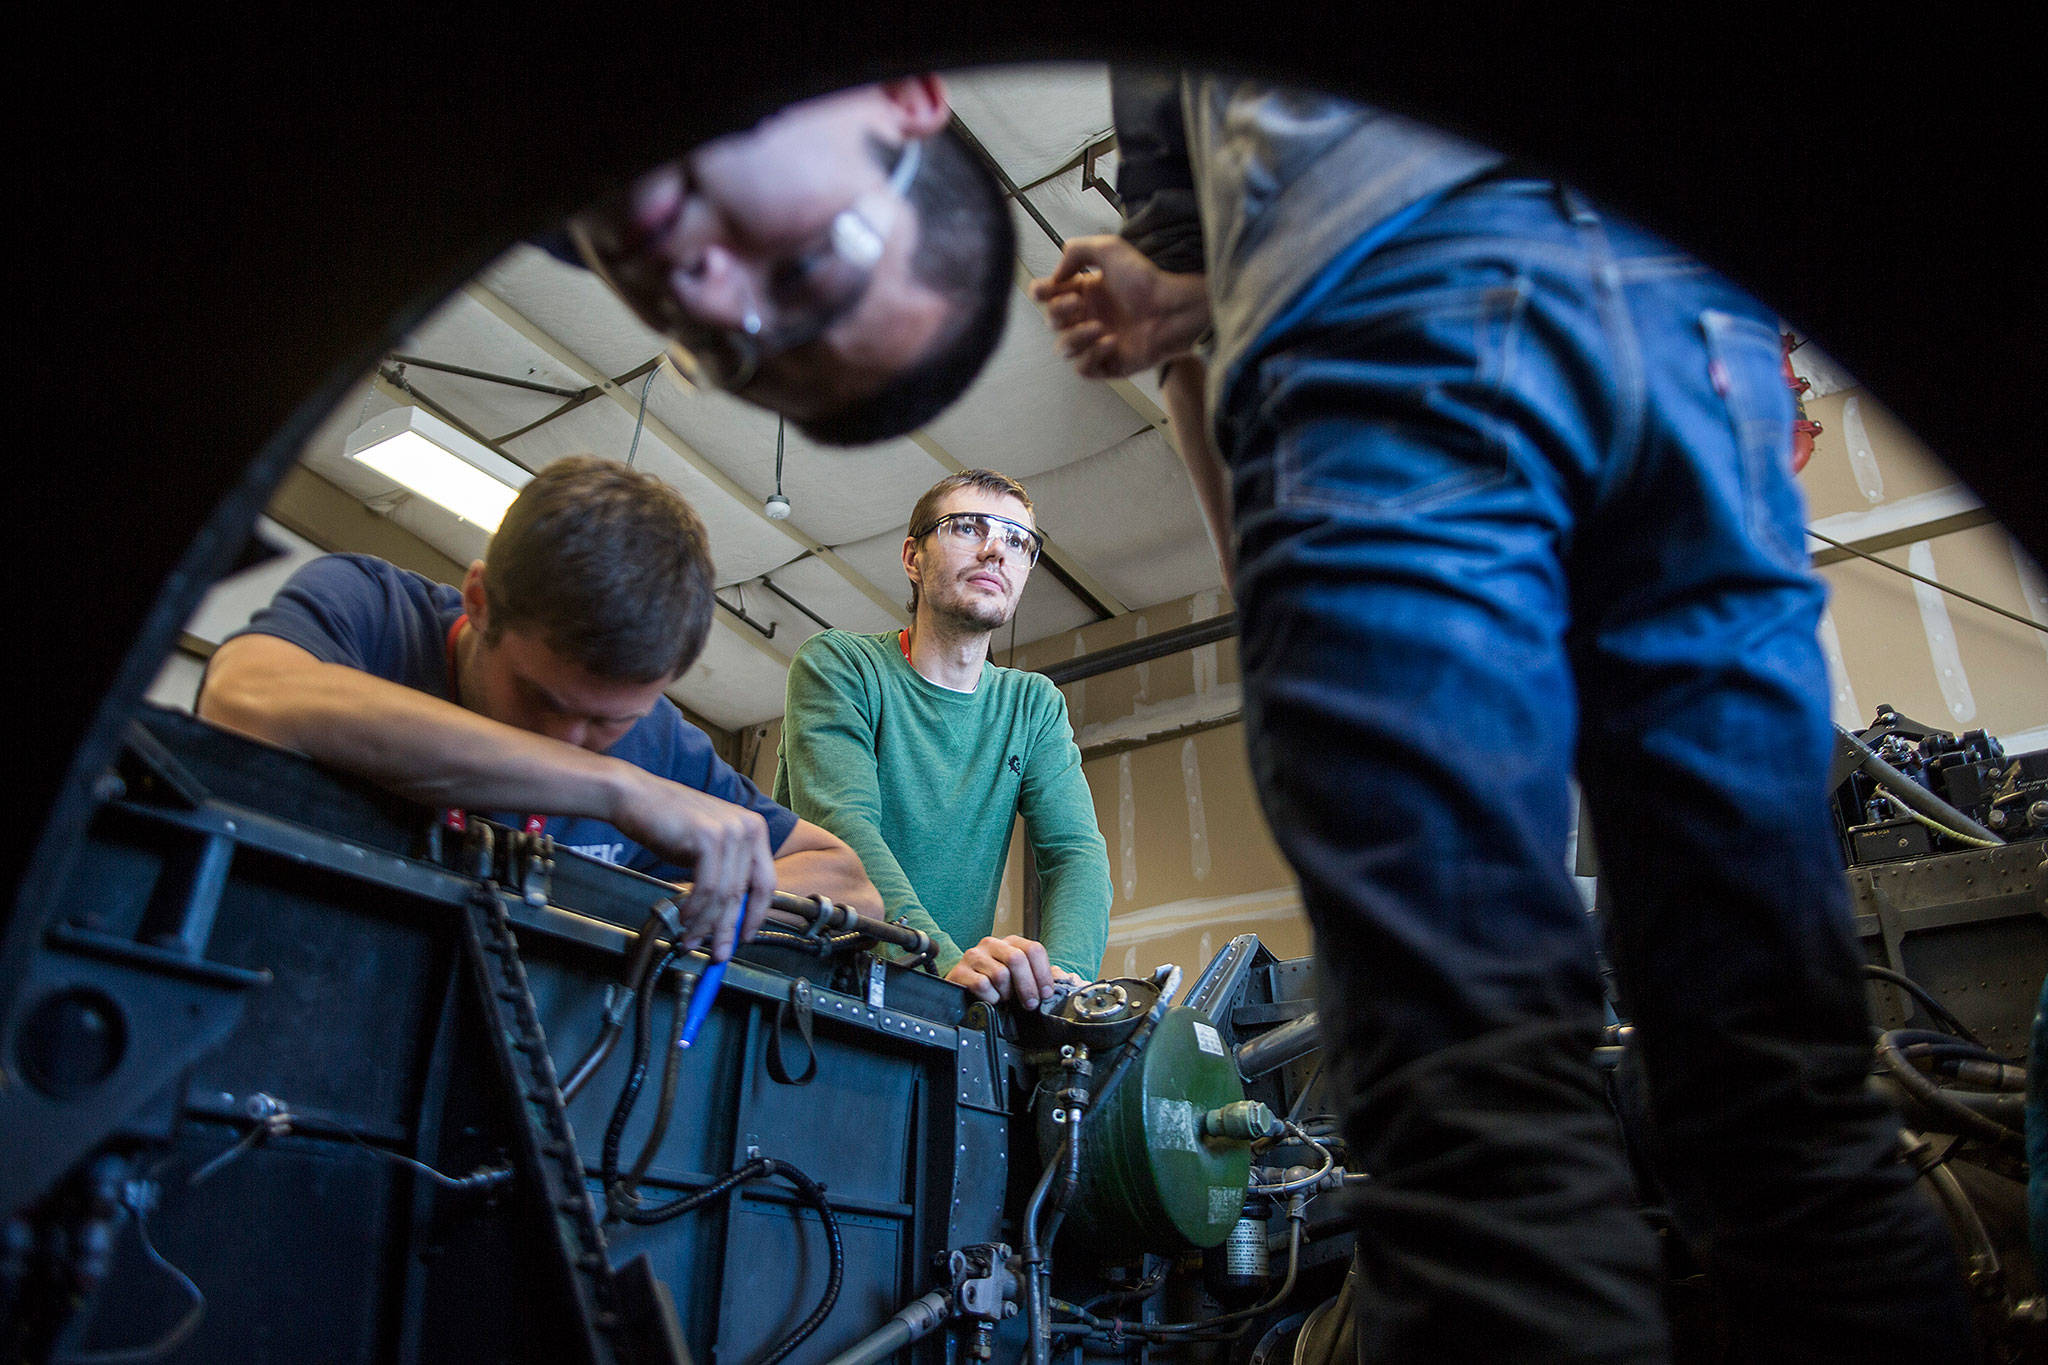 Alexey Ryabinin, center, looks up while his fellow classmates inspect the interior of a BAC Jet Provost that they removed a Viper engine from during class at Everett Community College’s Aviation Maintenance Technician School on Friday, July 13, 2018 in Everett, Wa. (Olivia Vanni / The Herald)